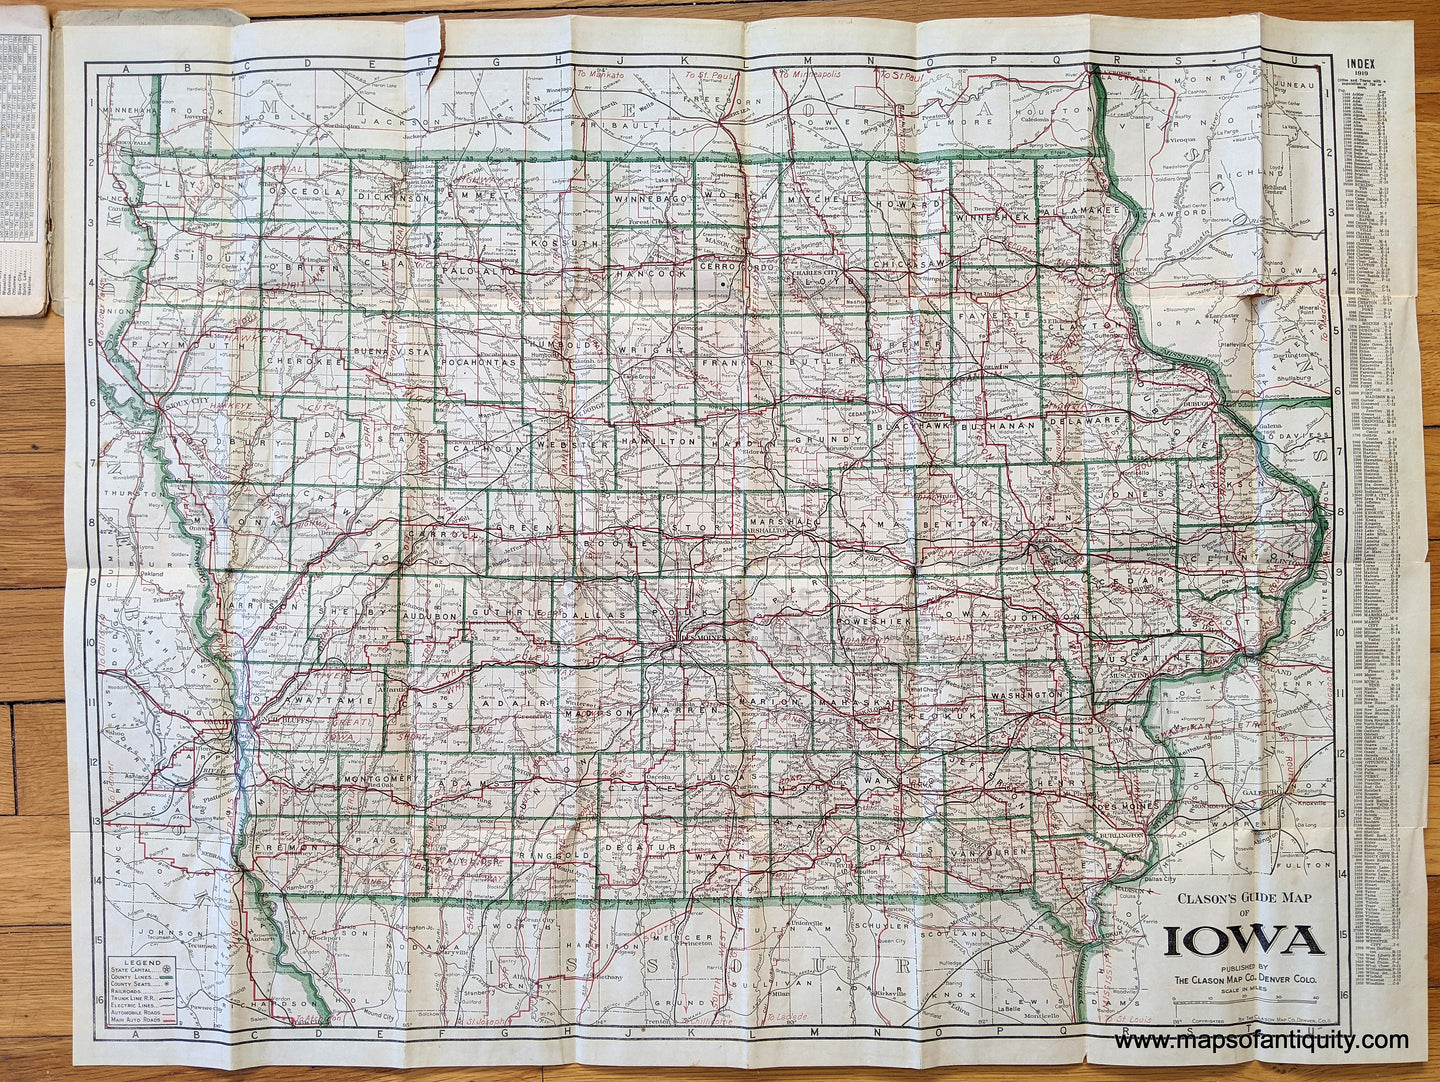 Genuine-Antique-Folding-Map-Clason's-Guide-Map-of-Iowa-United-States-Midwest-1919-Clason-Map-Co.-Maps-Of-Antiquity-1800s-19th-century